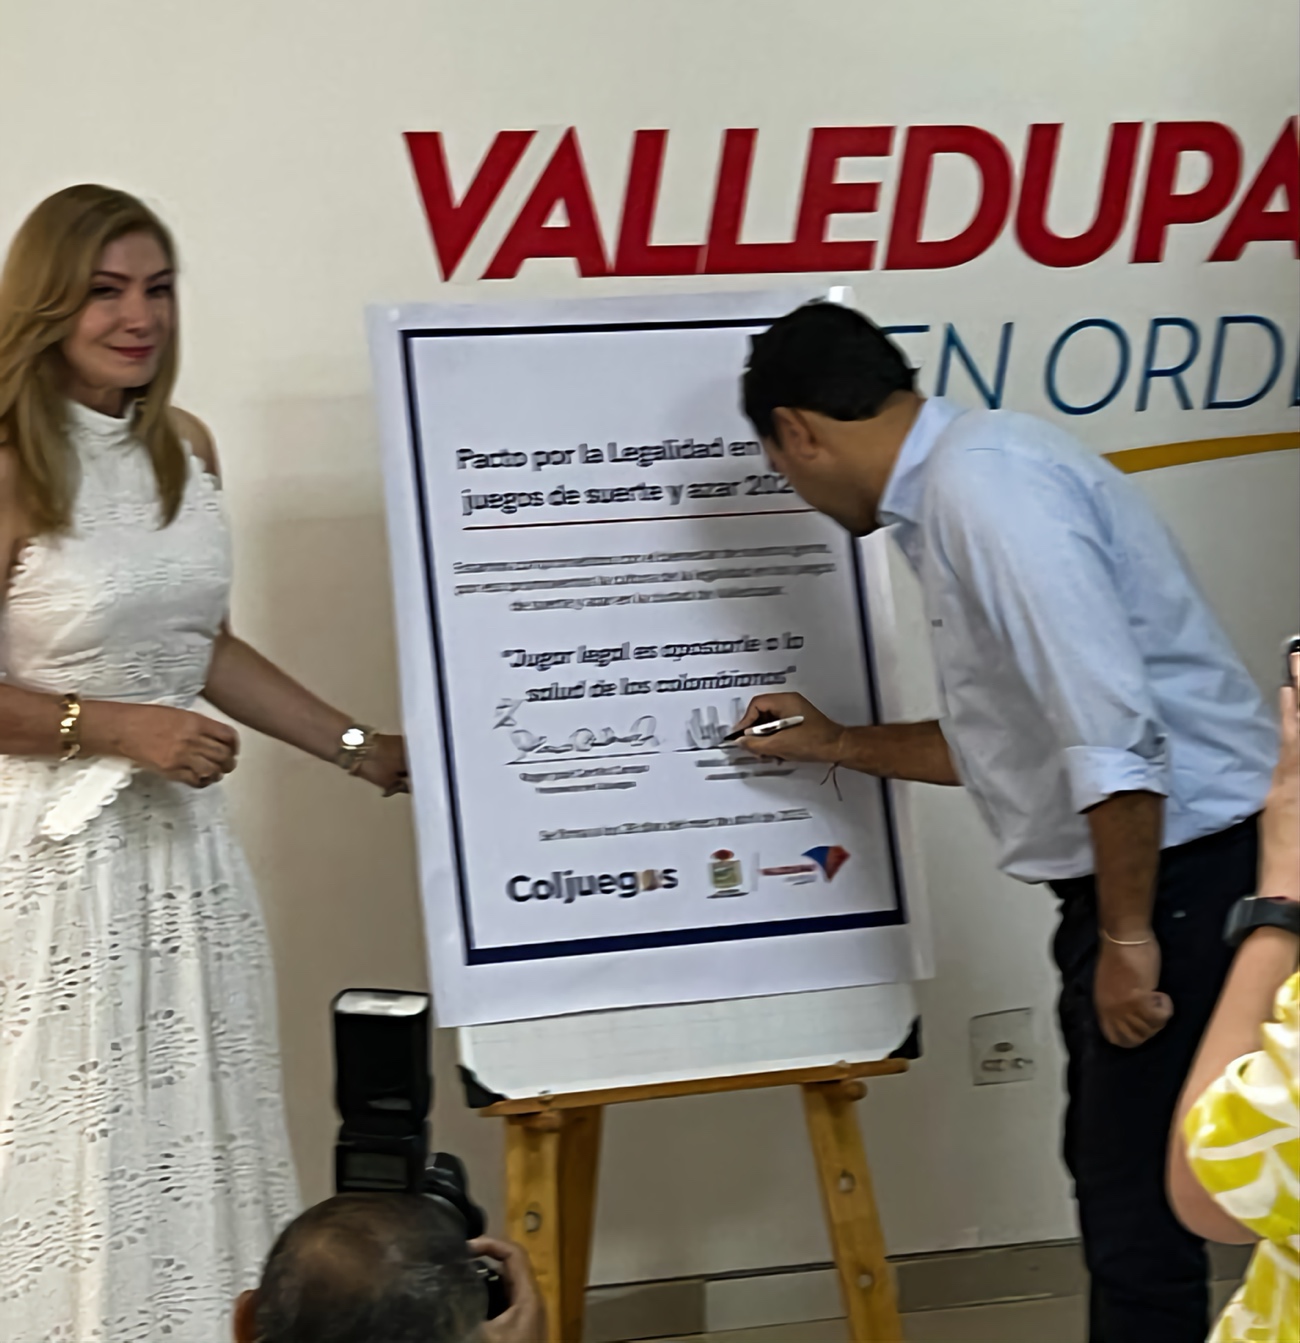 https://www.mundovideo.com.co/colombian-gambling-news/coljuegos-signs-an-agreement-for-legality-in-valledupar